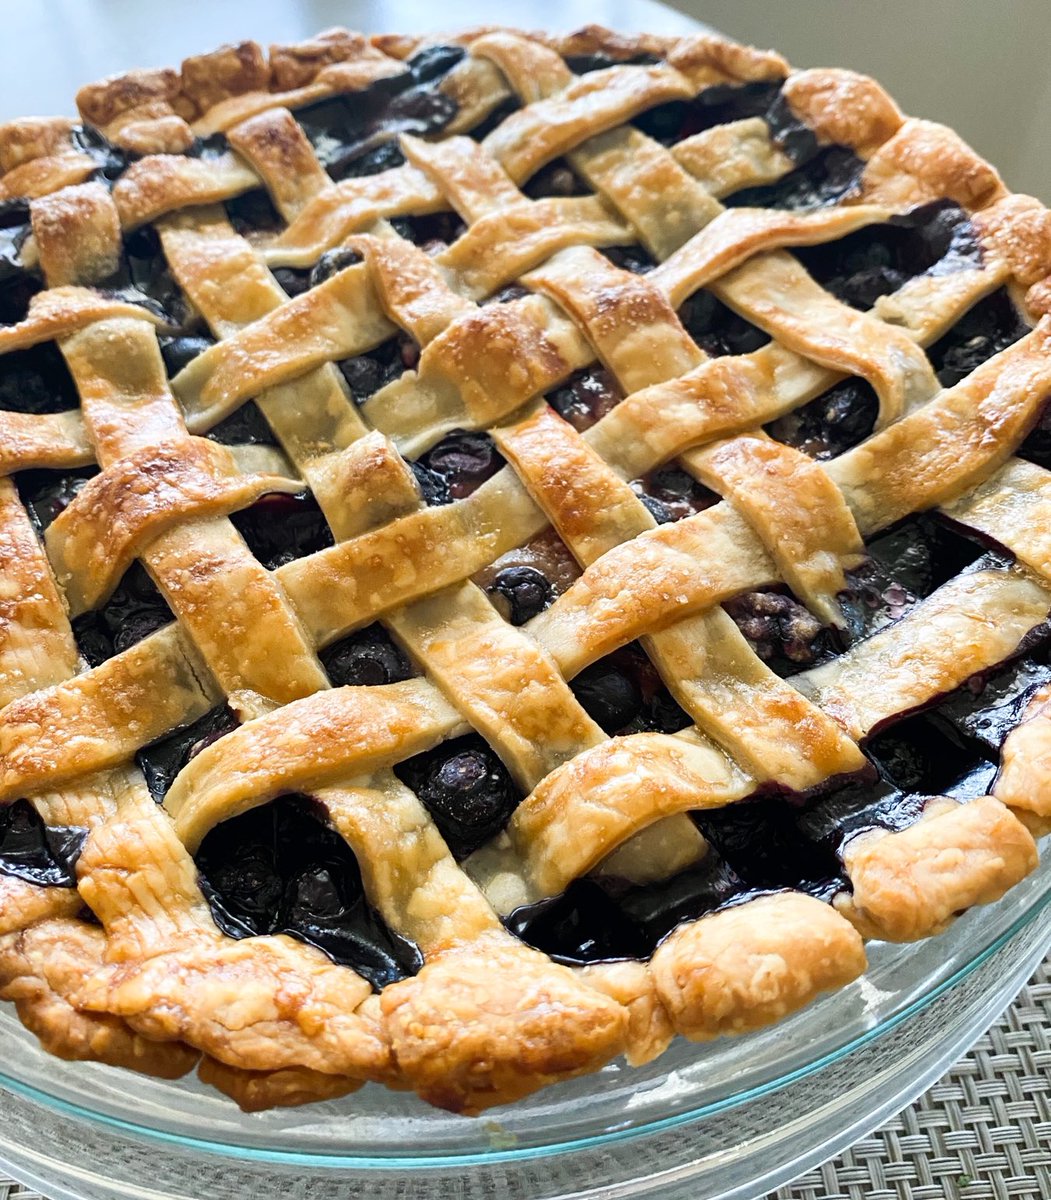 July is national Blueberry month! Time to celebrate 🎊 ... so we’re making this Easy #BlueberryPie 🥧 🎉. (Click the blueberry pie picture in the link for full recipe!) #nationalblueberryday linkin.bio/simplydellicio…